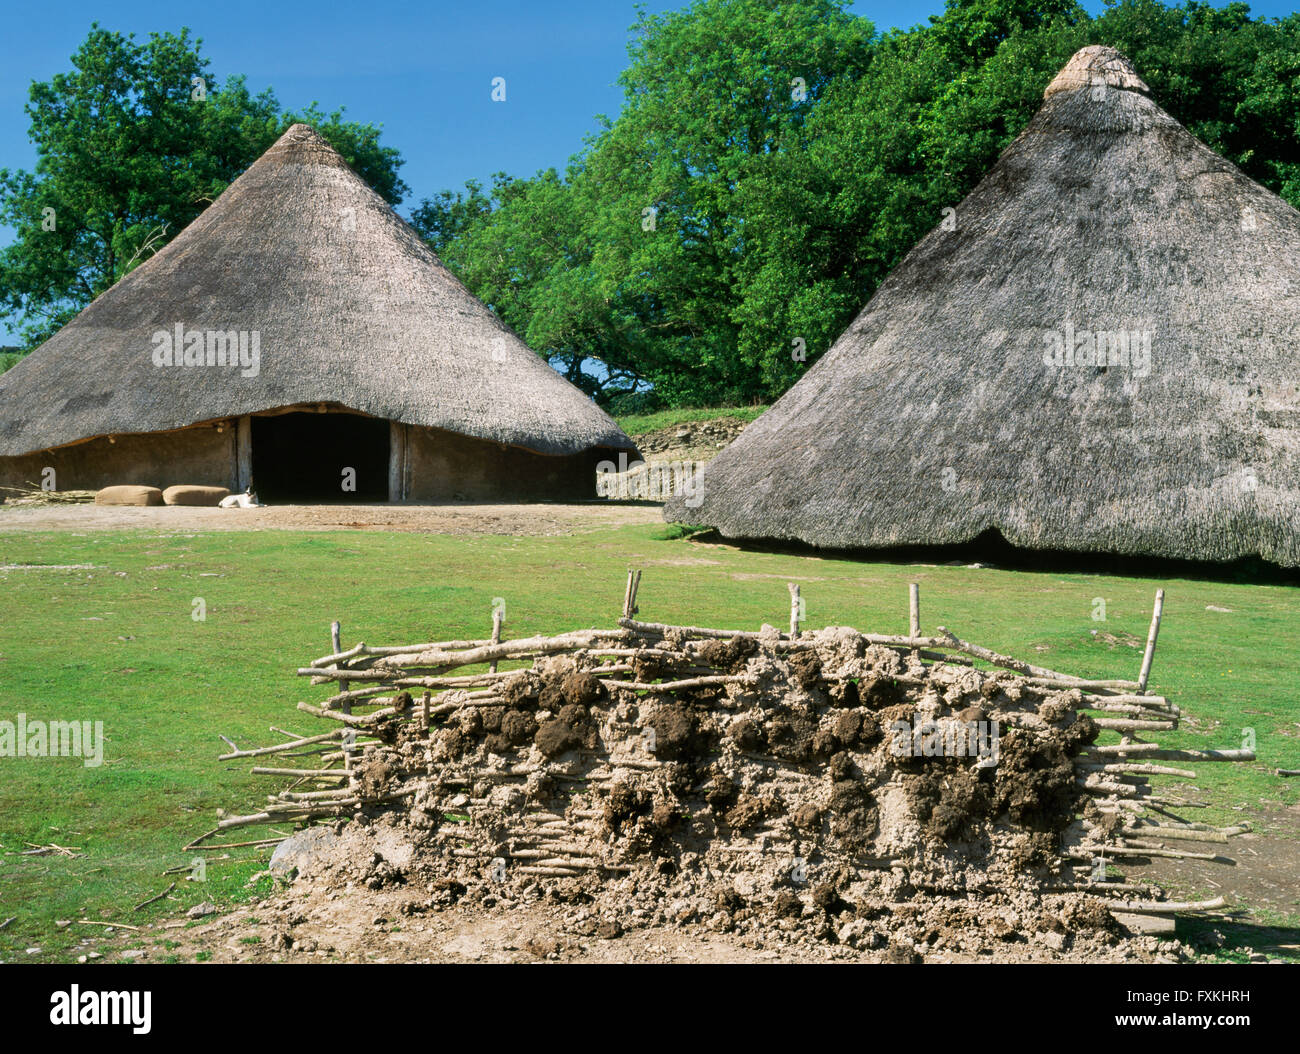 Reconstructed roundhouses 6 (L) & 2 (R) at Castell Henllys defended settlement, Pembrokeshire, occupied during the Late Bronze Age & Iron Age. Stock Photo